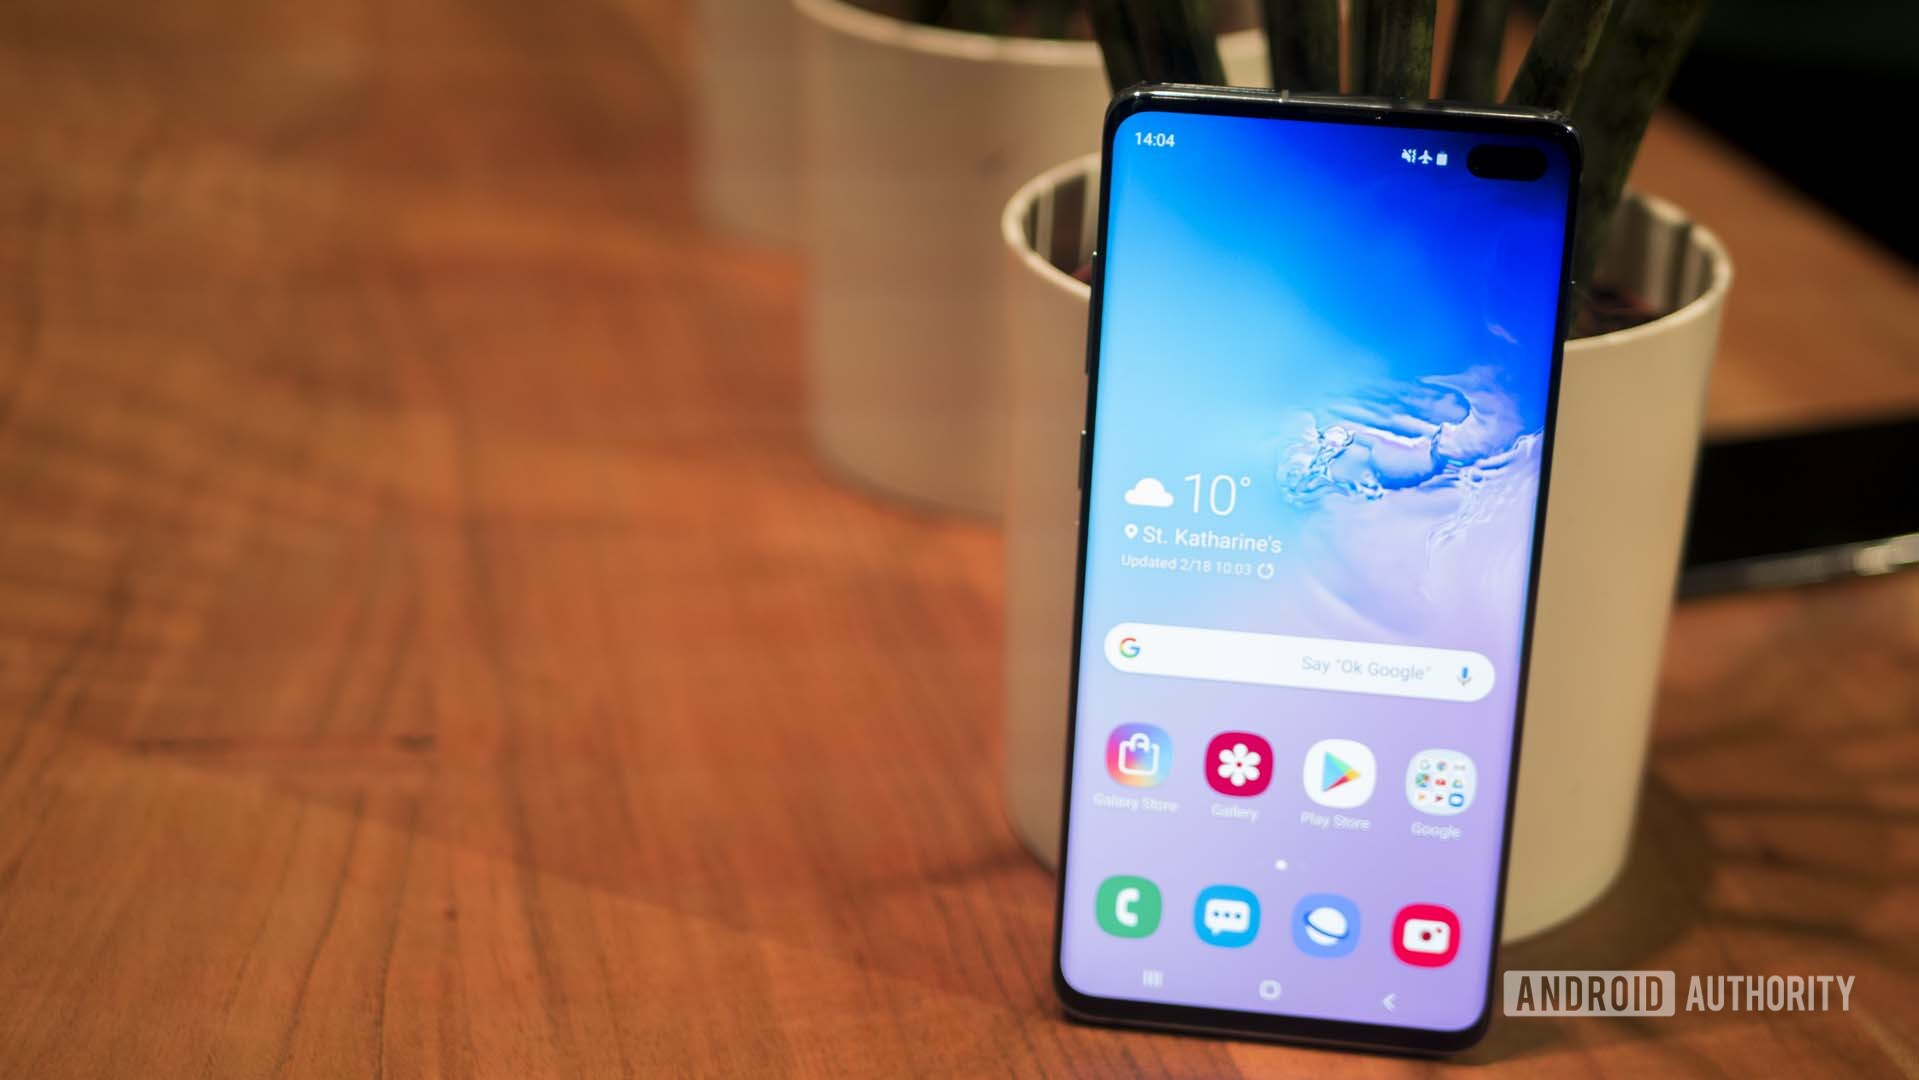 Samsung Galaxy S10 Wallpapers Are Here Grab Them At Full Resolution